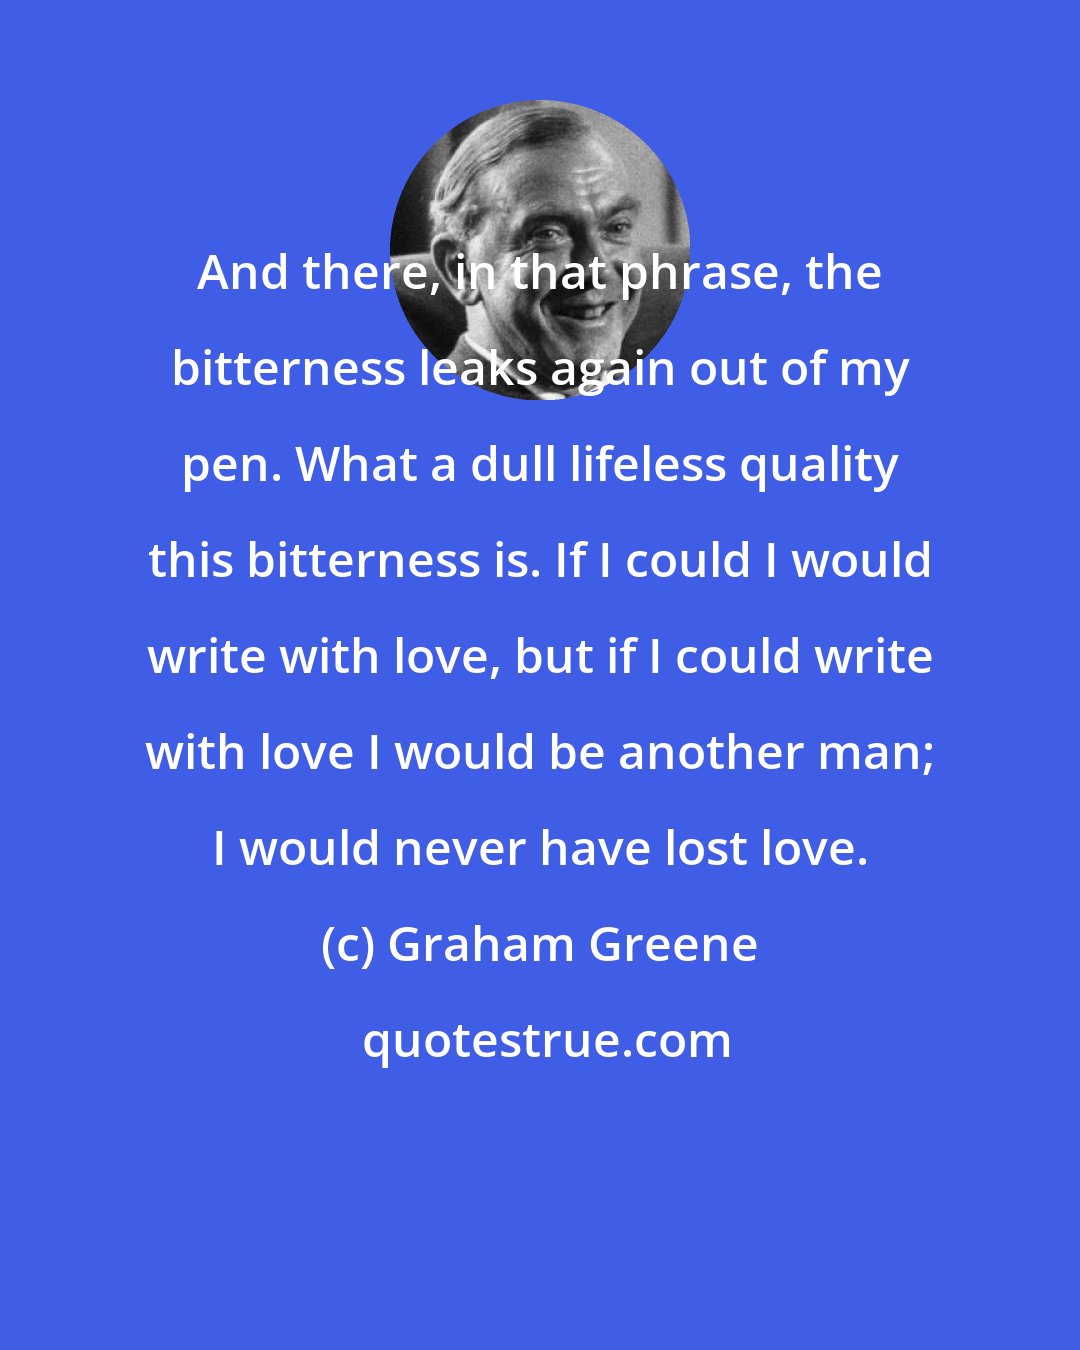 Graham Greene: And there, in that phrase, the bitterness leaks again out of my pen. What a dull lifeless quality this bitterness is. If I could I would write with love, but if I could write with love I would be another man; I would never have lost love.